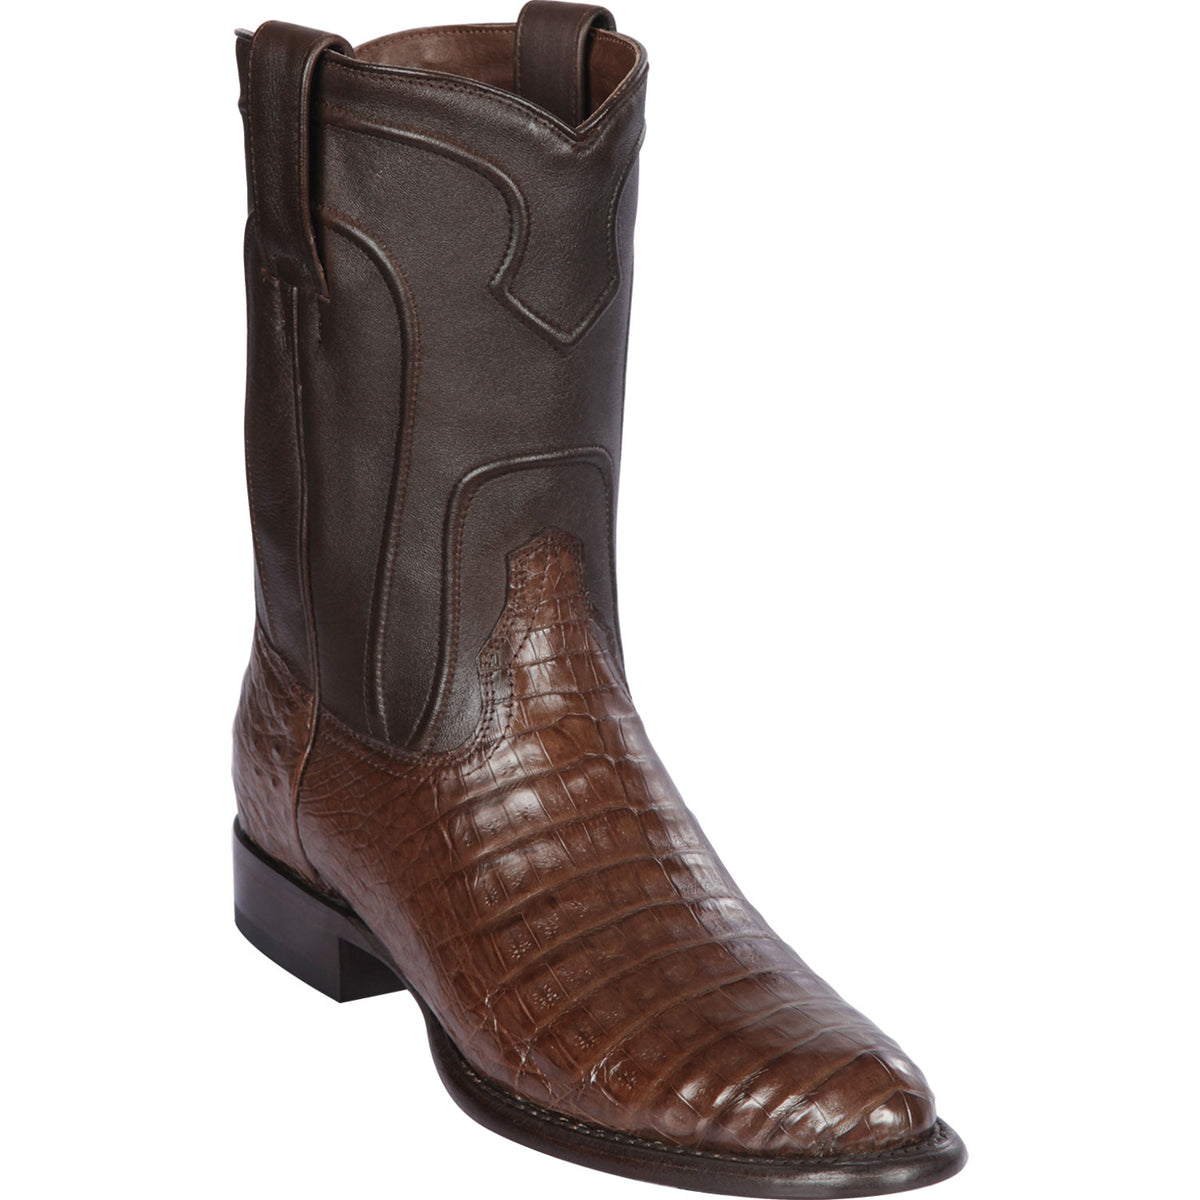 Caiman Belly Skin Boot LAB-6982